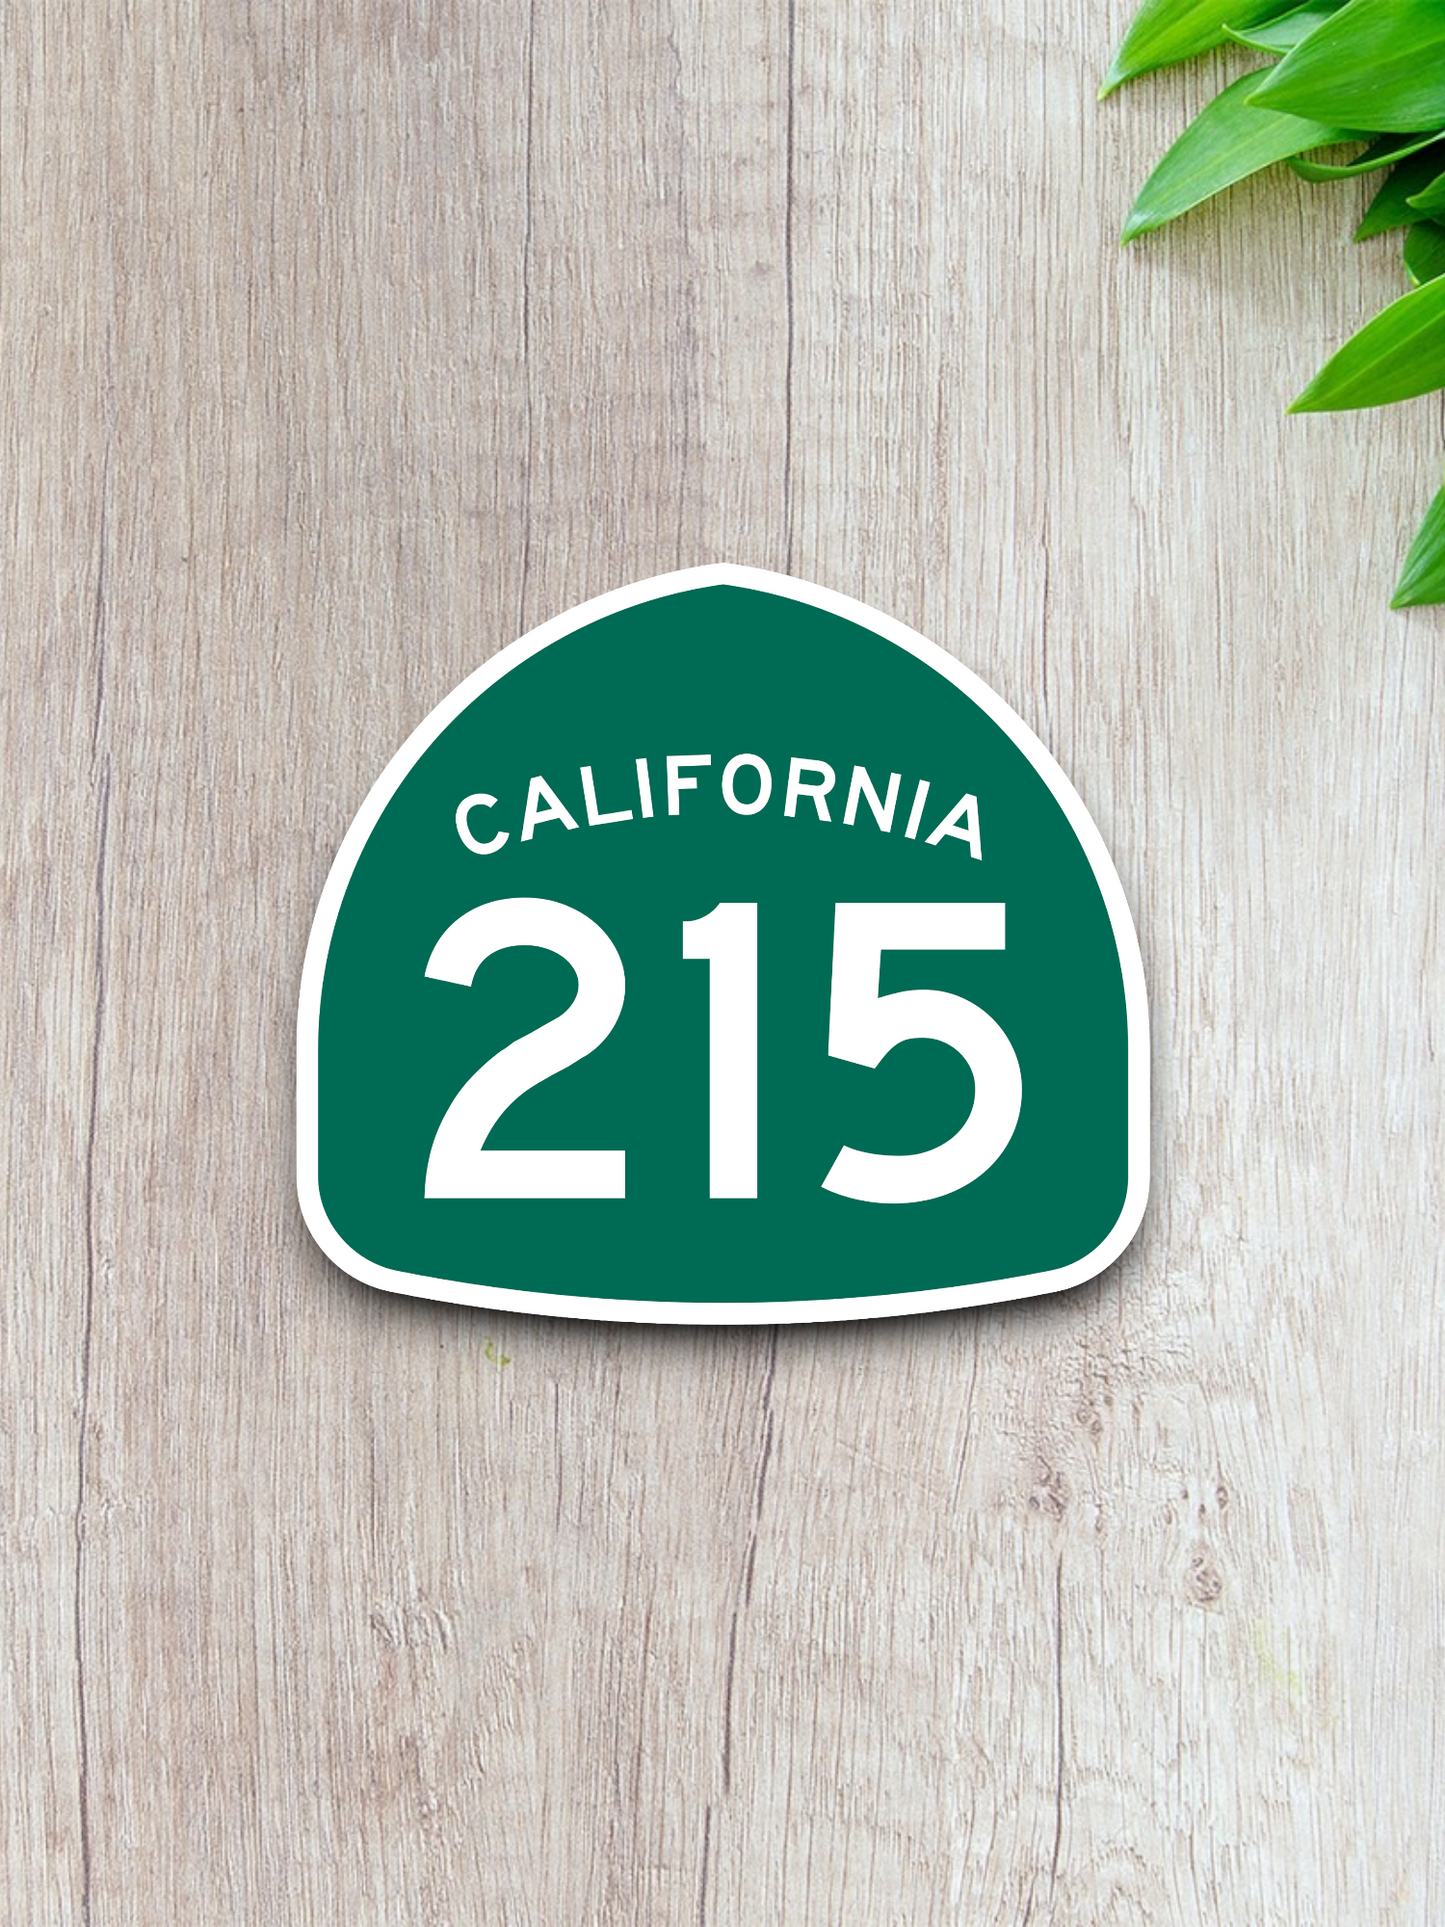 California State Route 215 Road Sign Sticker